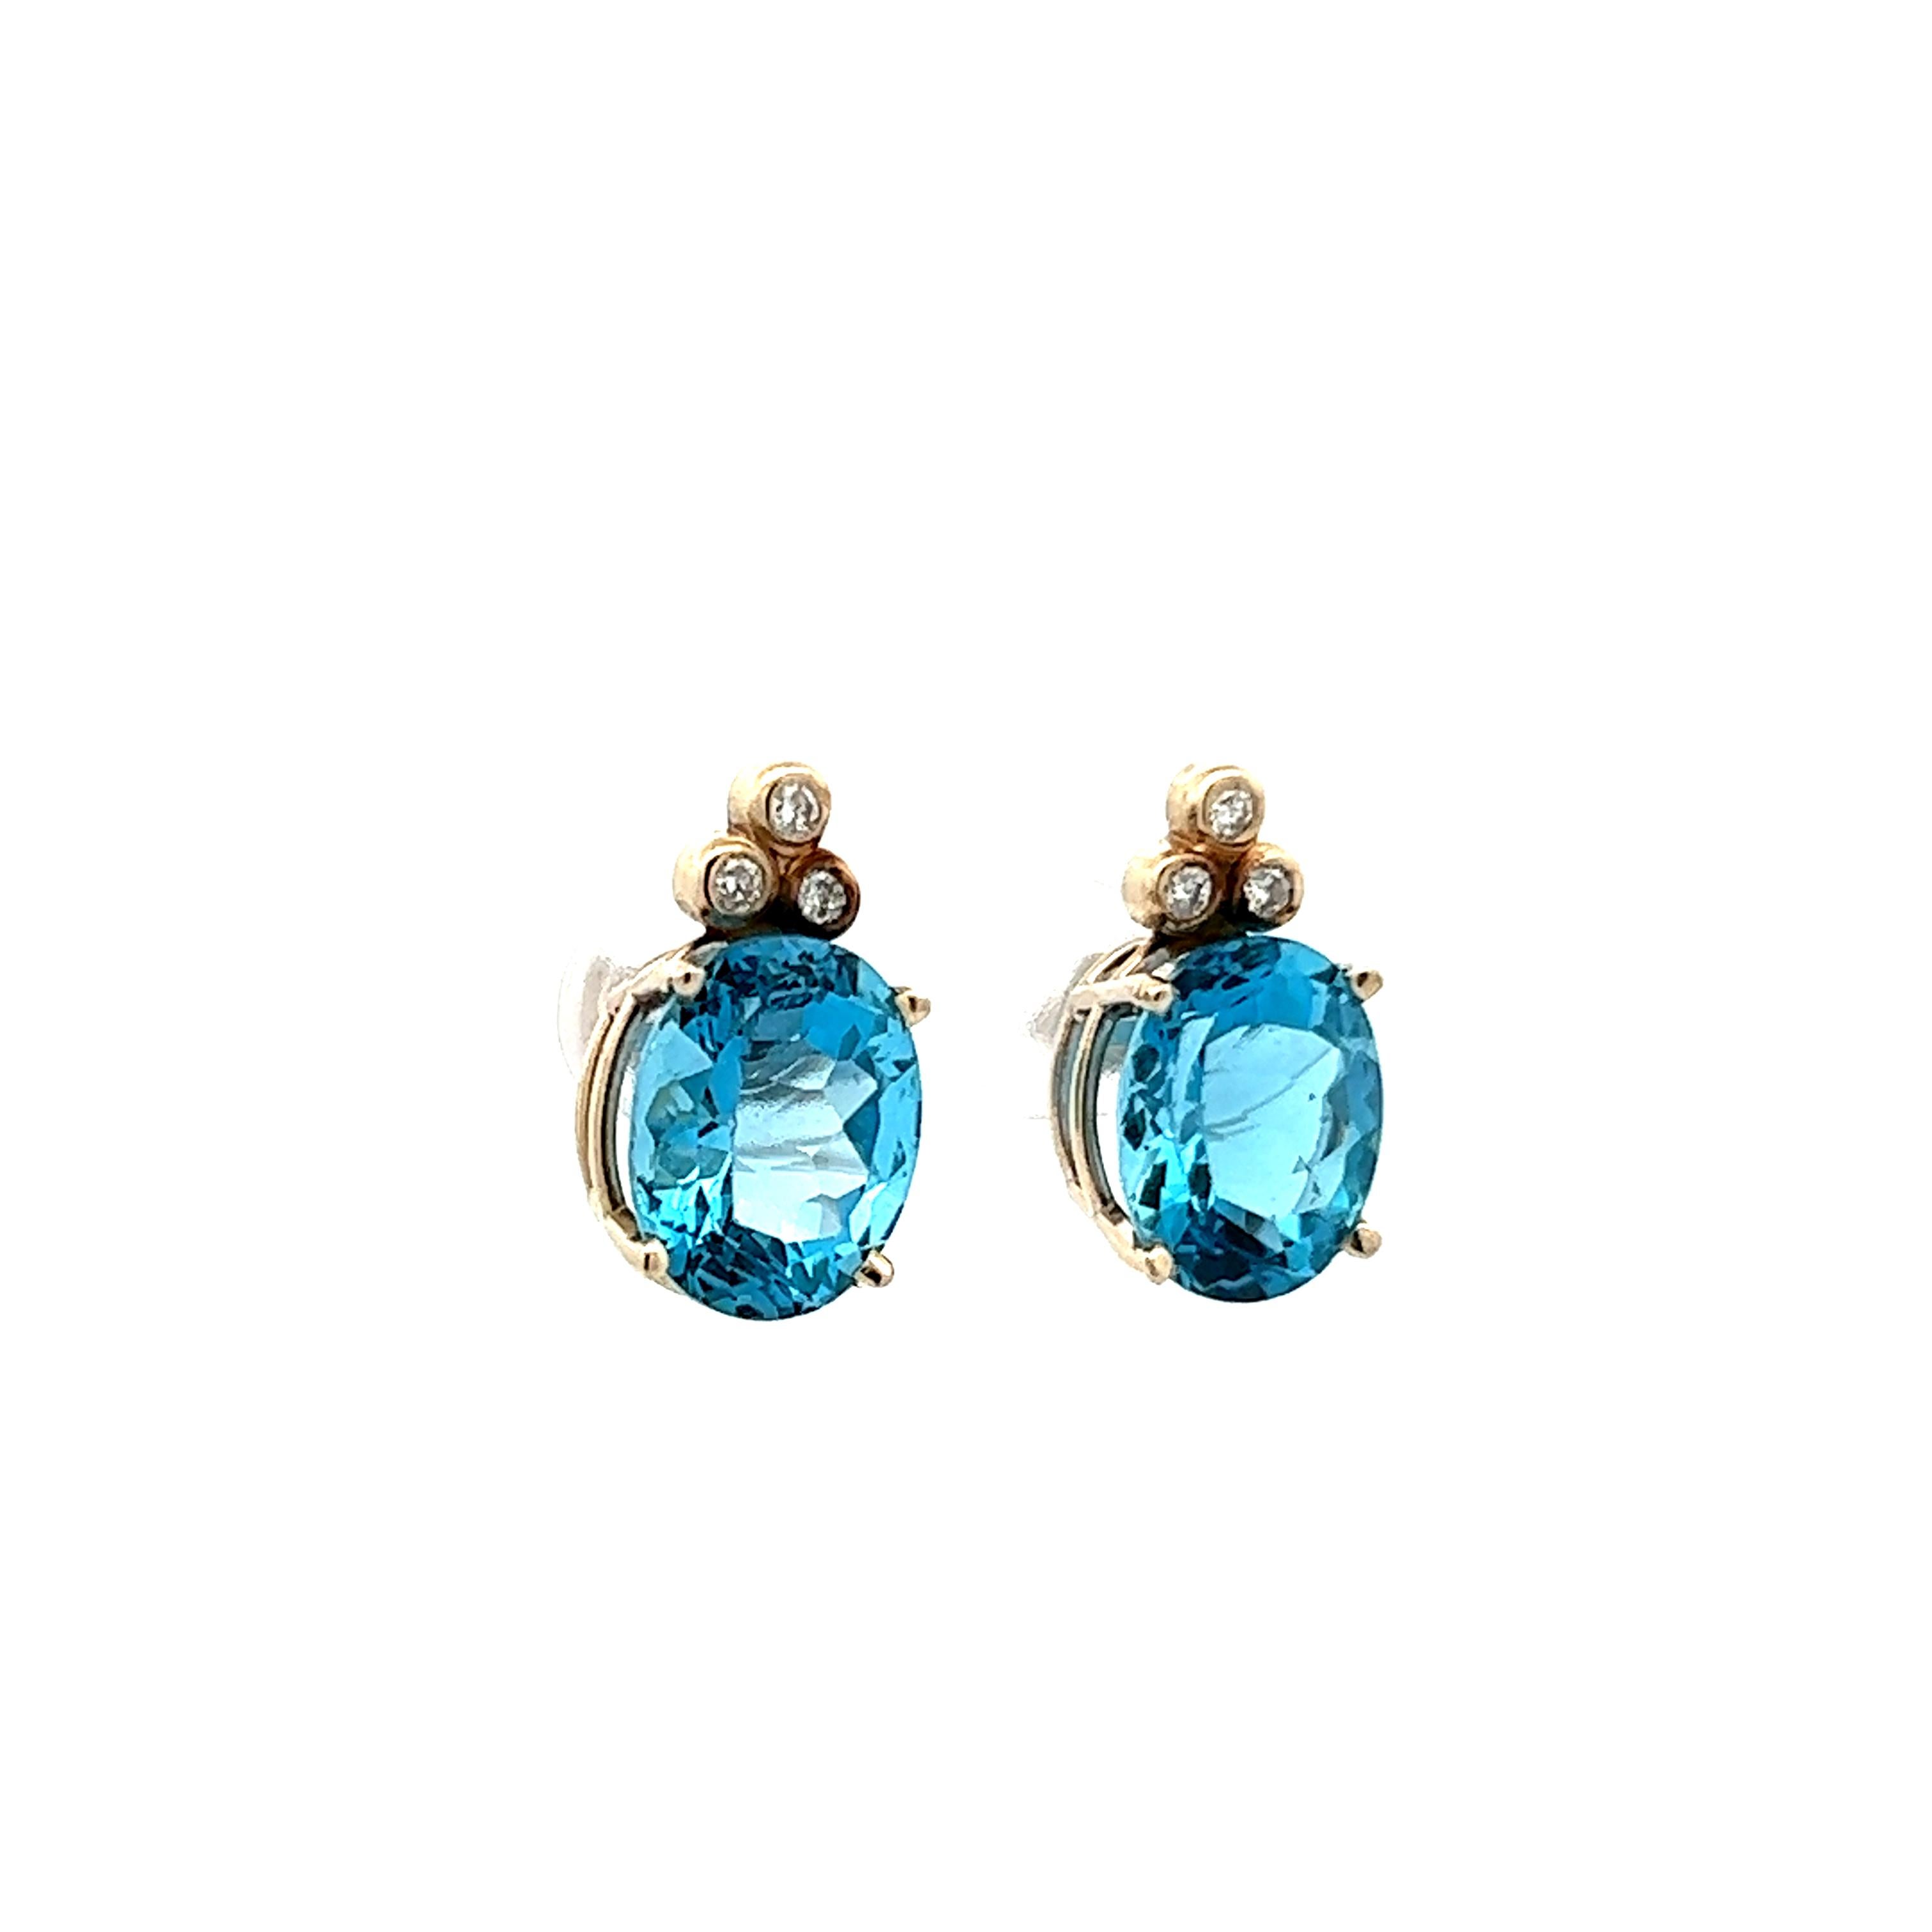 Contemporary 14K White Gold Blue Topaz & Diamond Earrings  In Excellent Condition For Sale In Lexington, KY